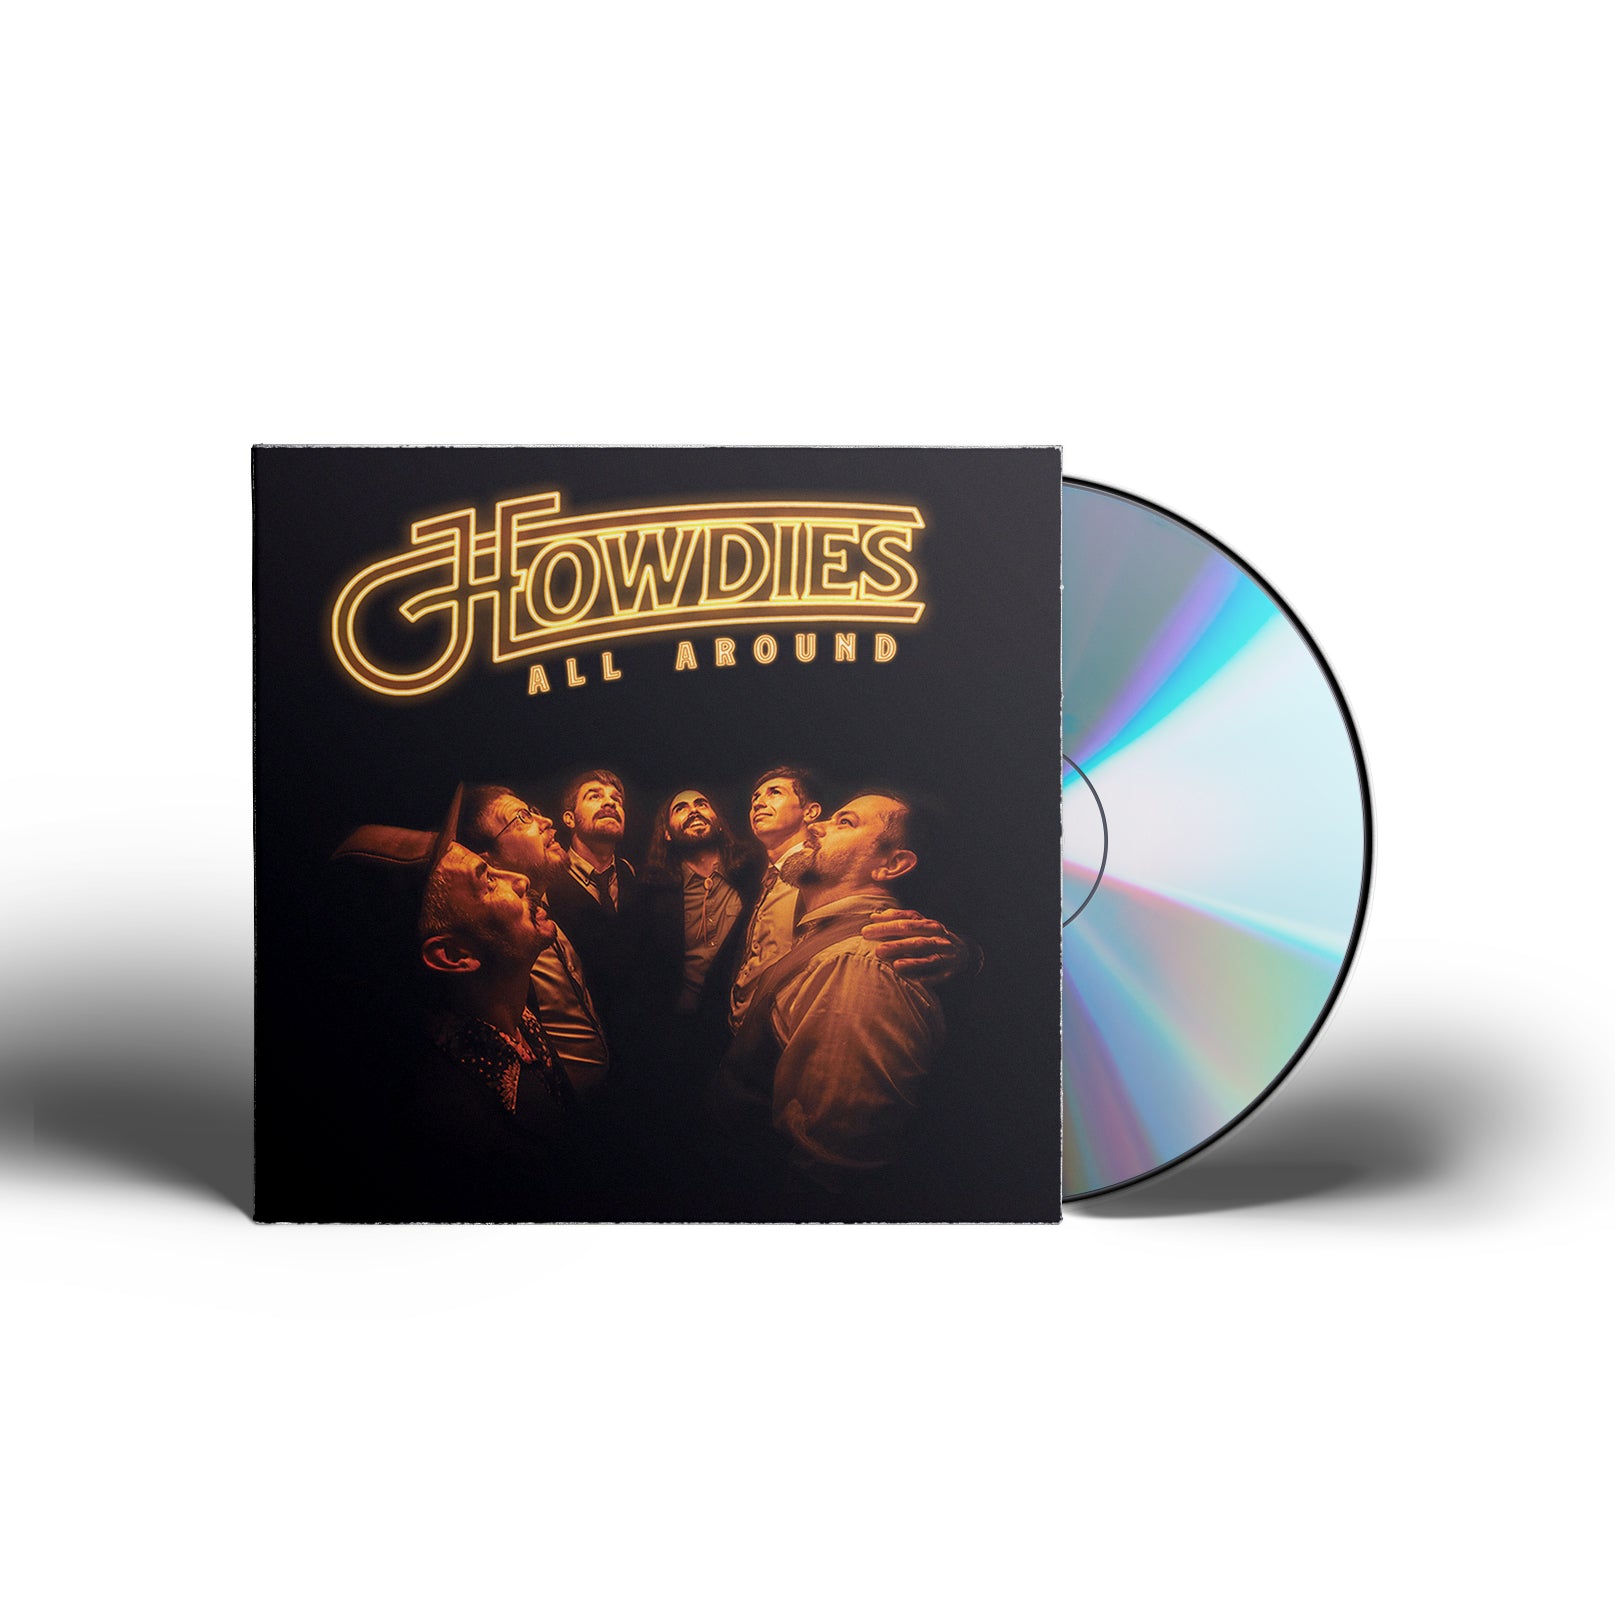 The Howdies - Howdies All Around [CD]